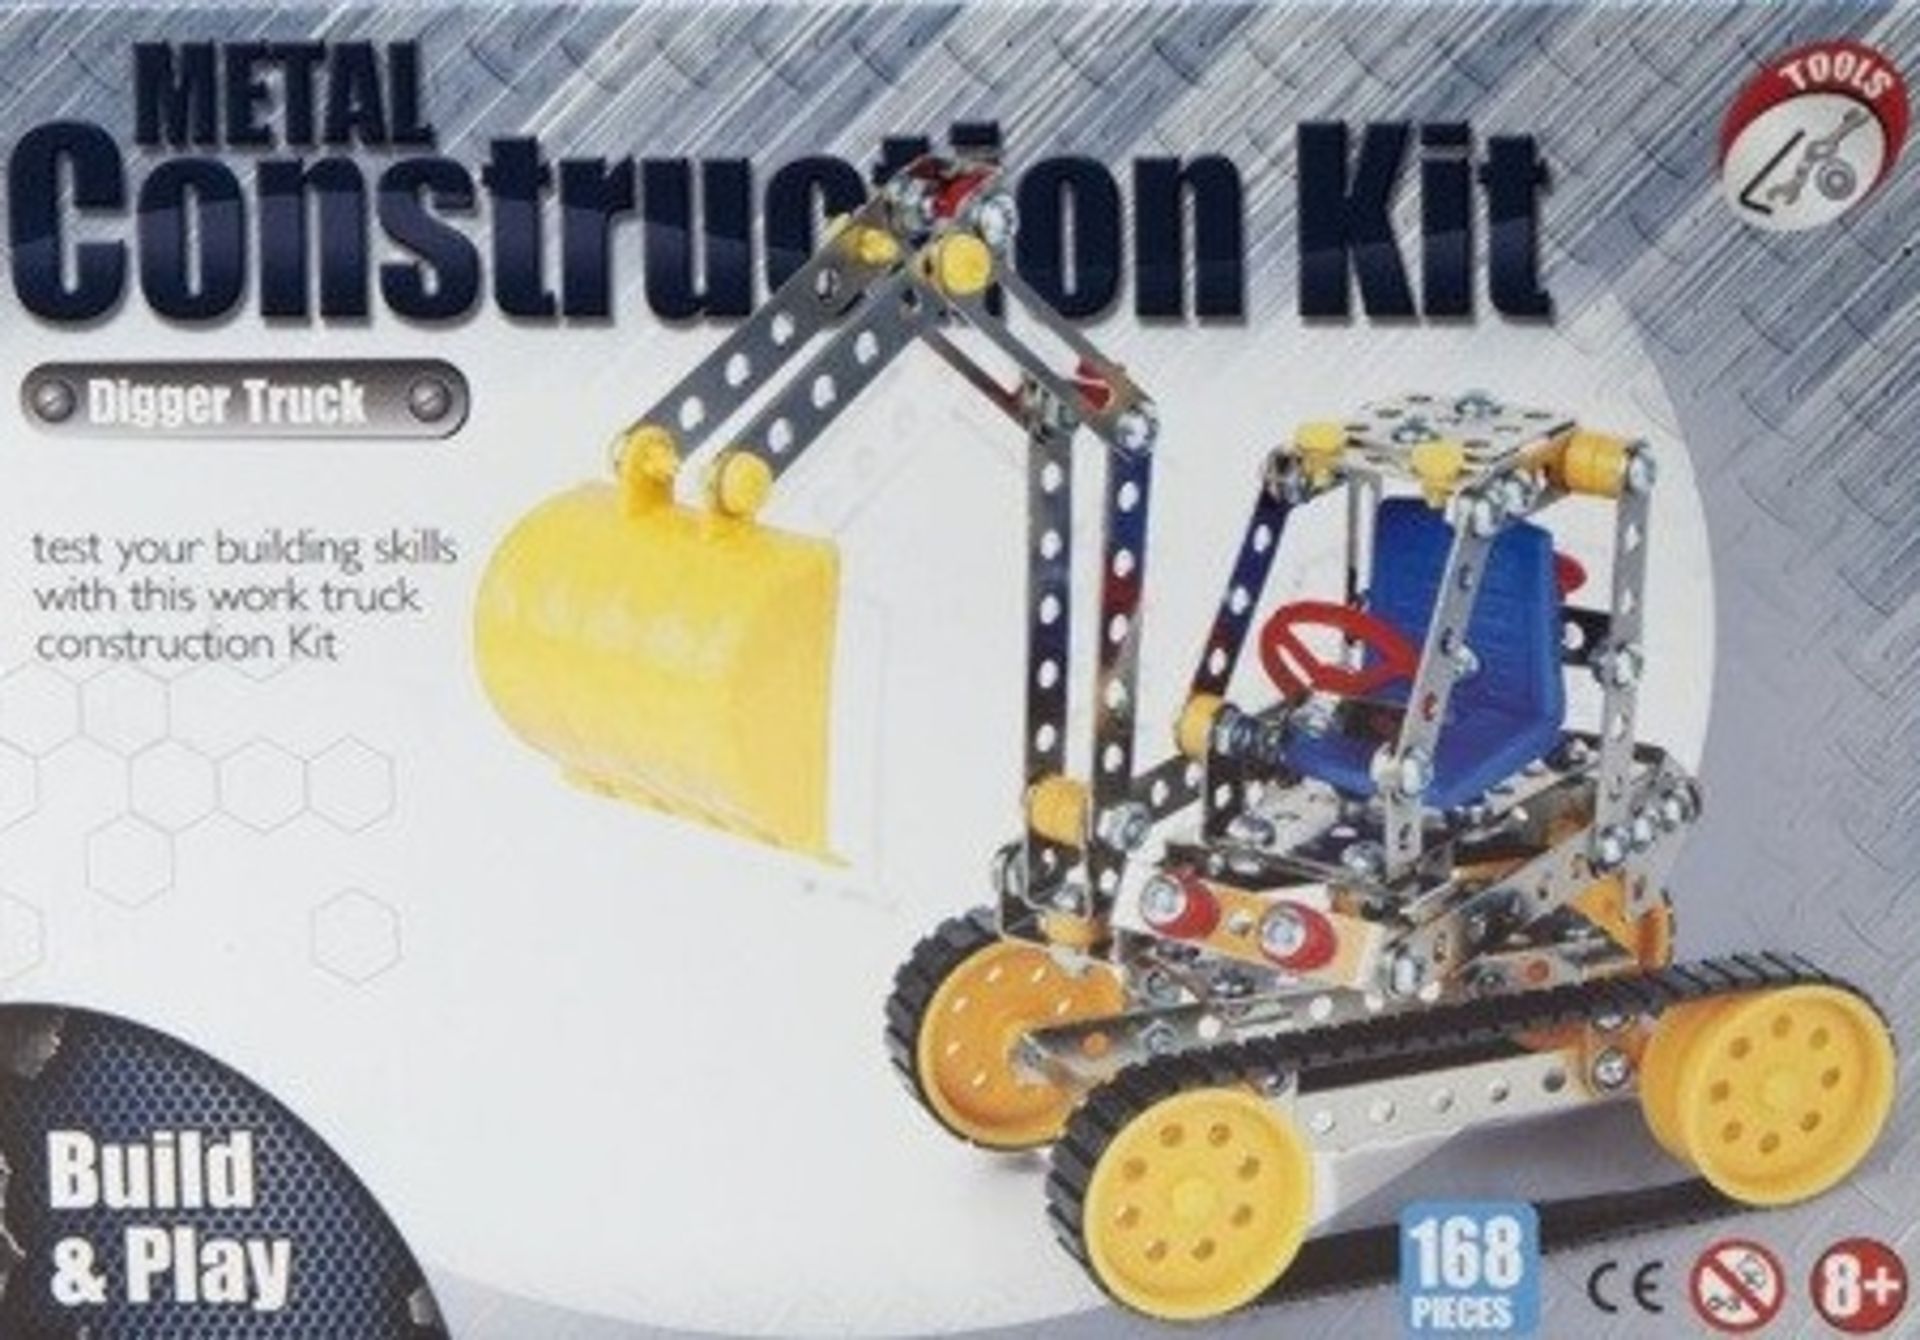 V *TRADE QTY* Brand New Metal Construction Kit Digger Truck With 168pcs and Tools X 3 YOUR BID PRICE